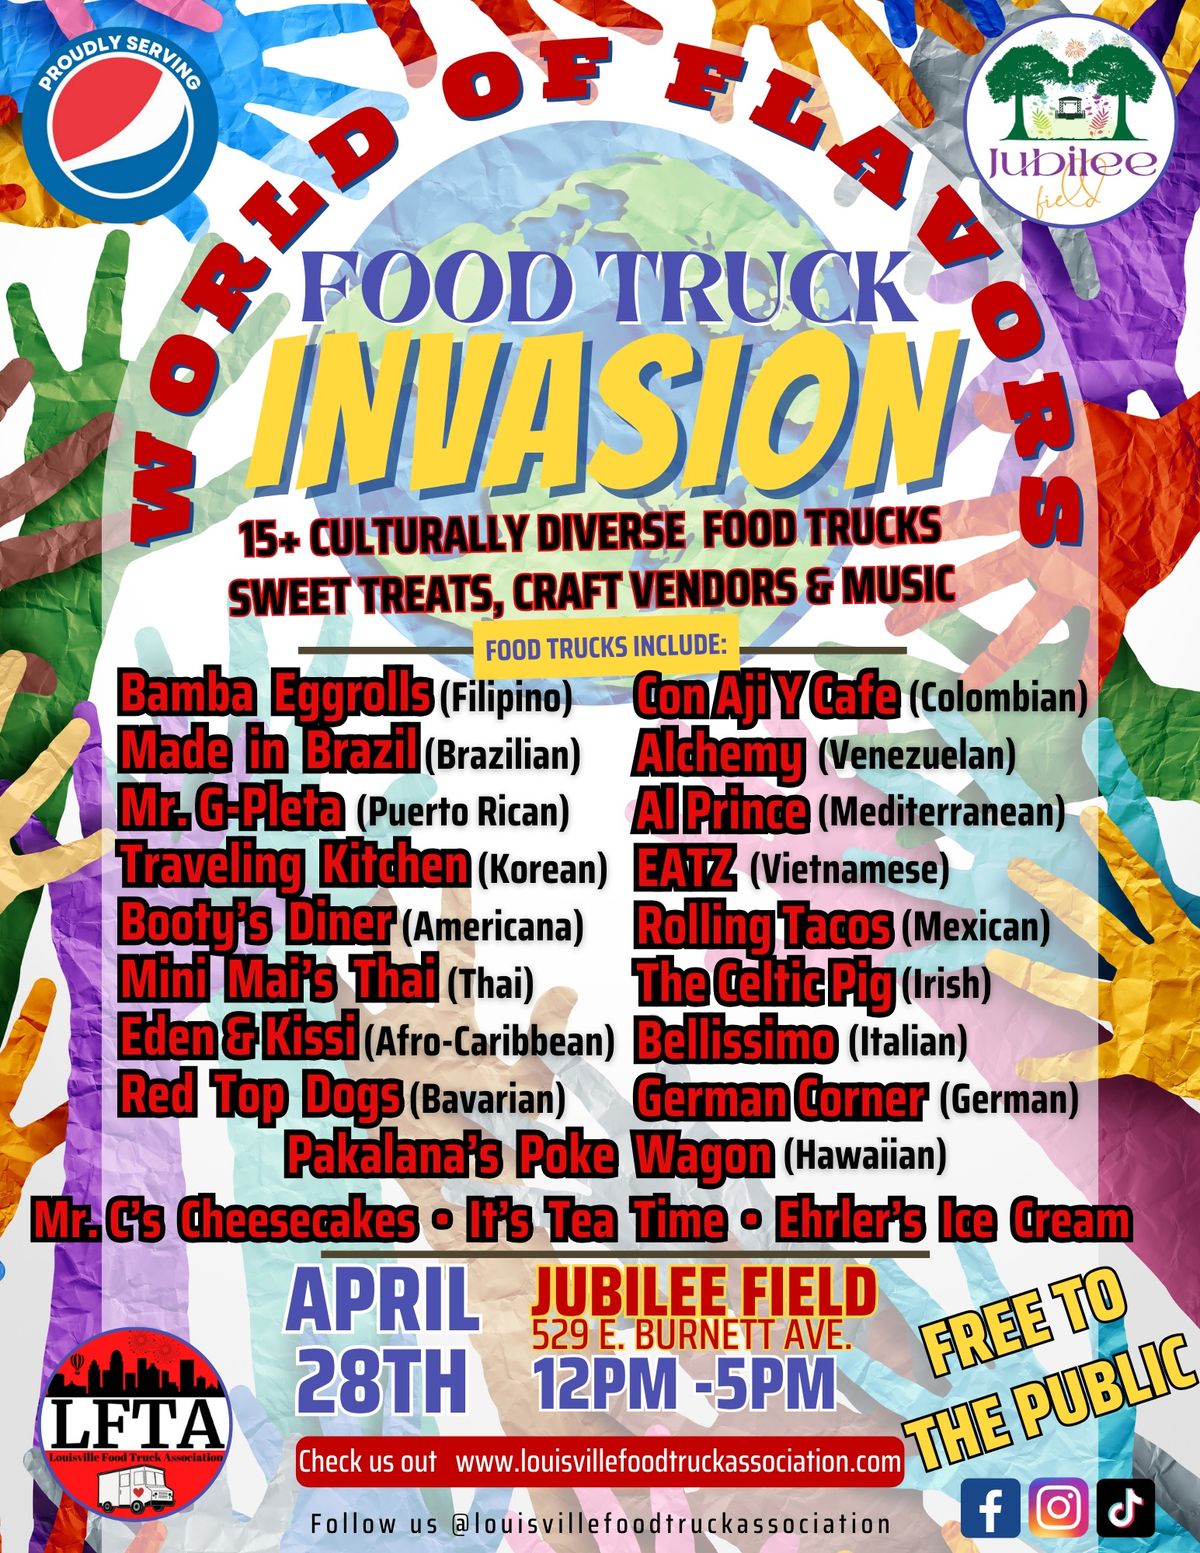 World of Flavors Food Truck Invasion